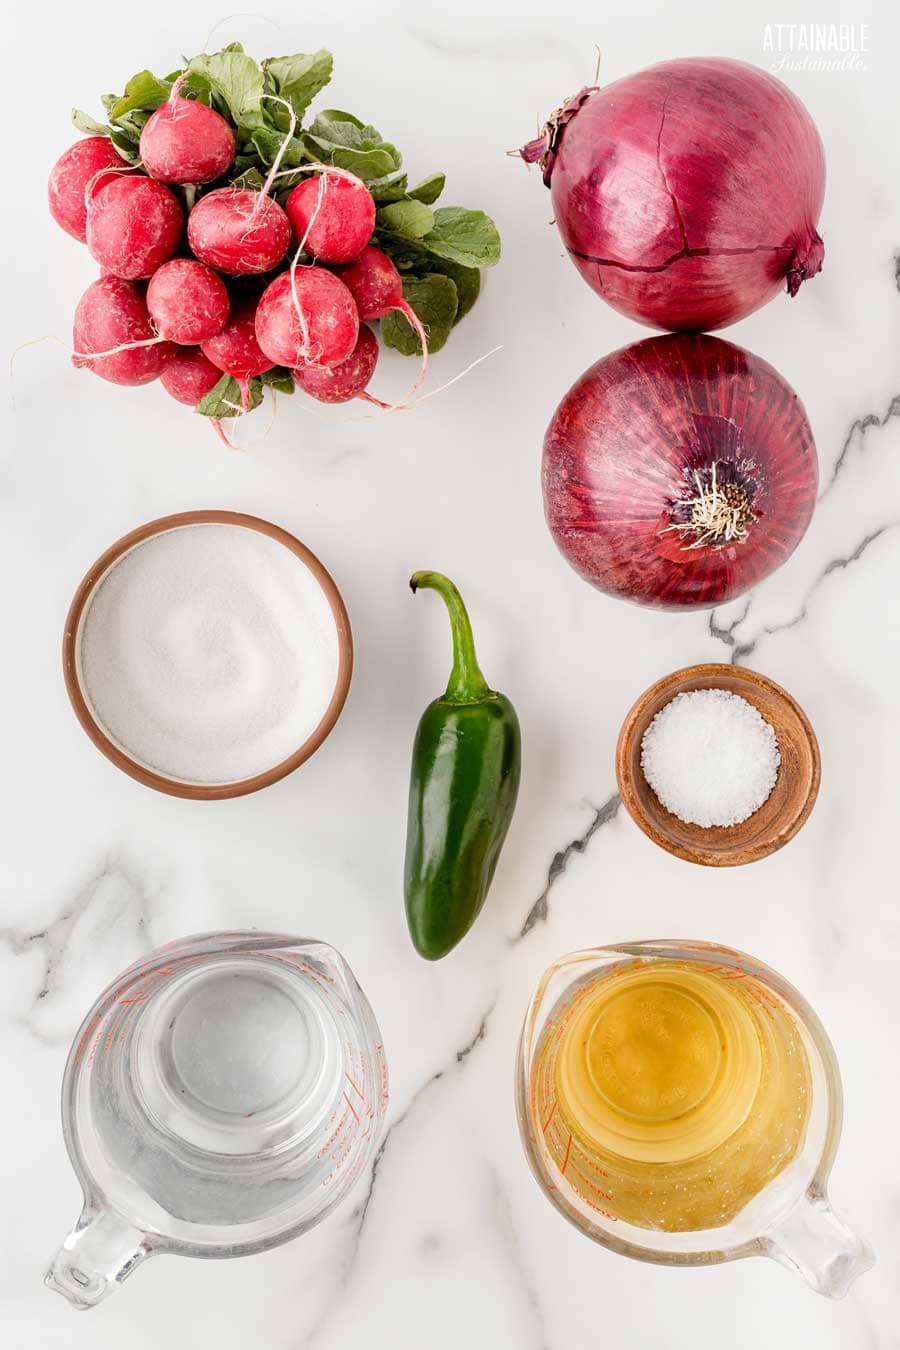 ingredients for pickled radishes on a marble background.